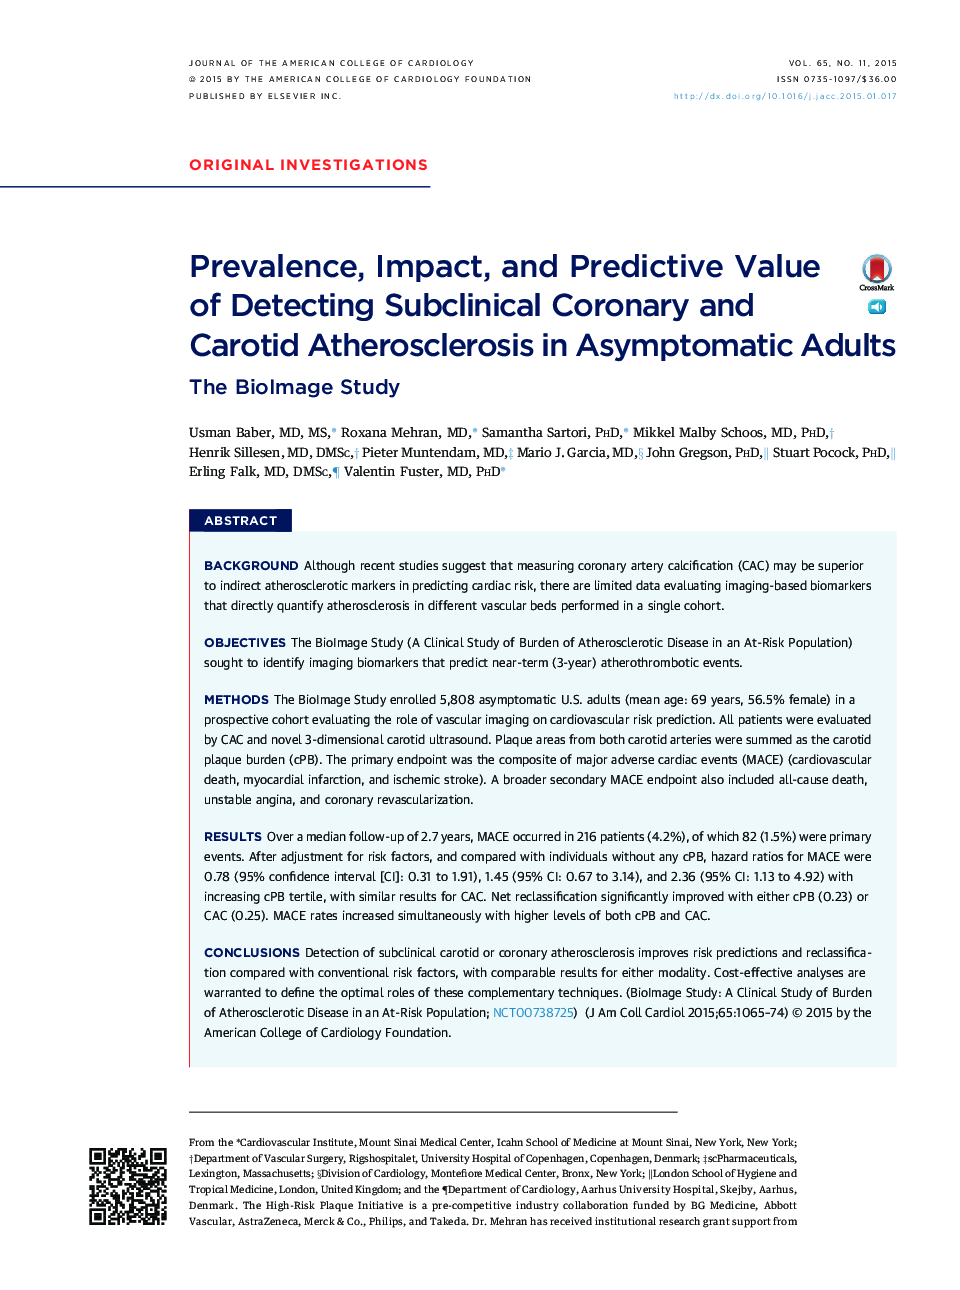 Prevalence, Impact, and Predictive Value of Detecting Subclinical Coronary and Carotid Atherosclerosis in Asymptomatic Adults : The BioImage Study